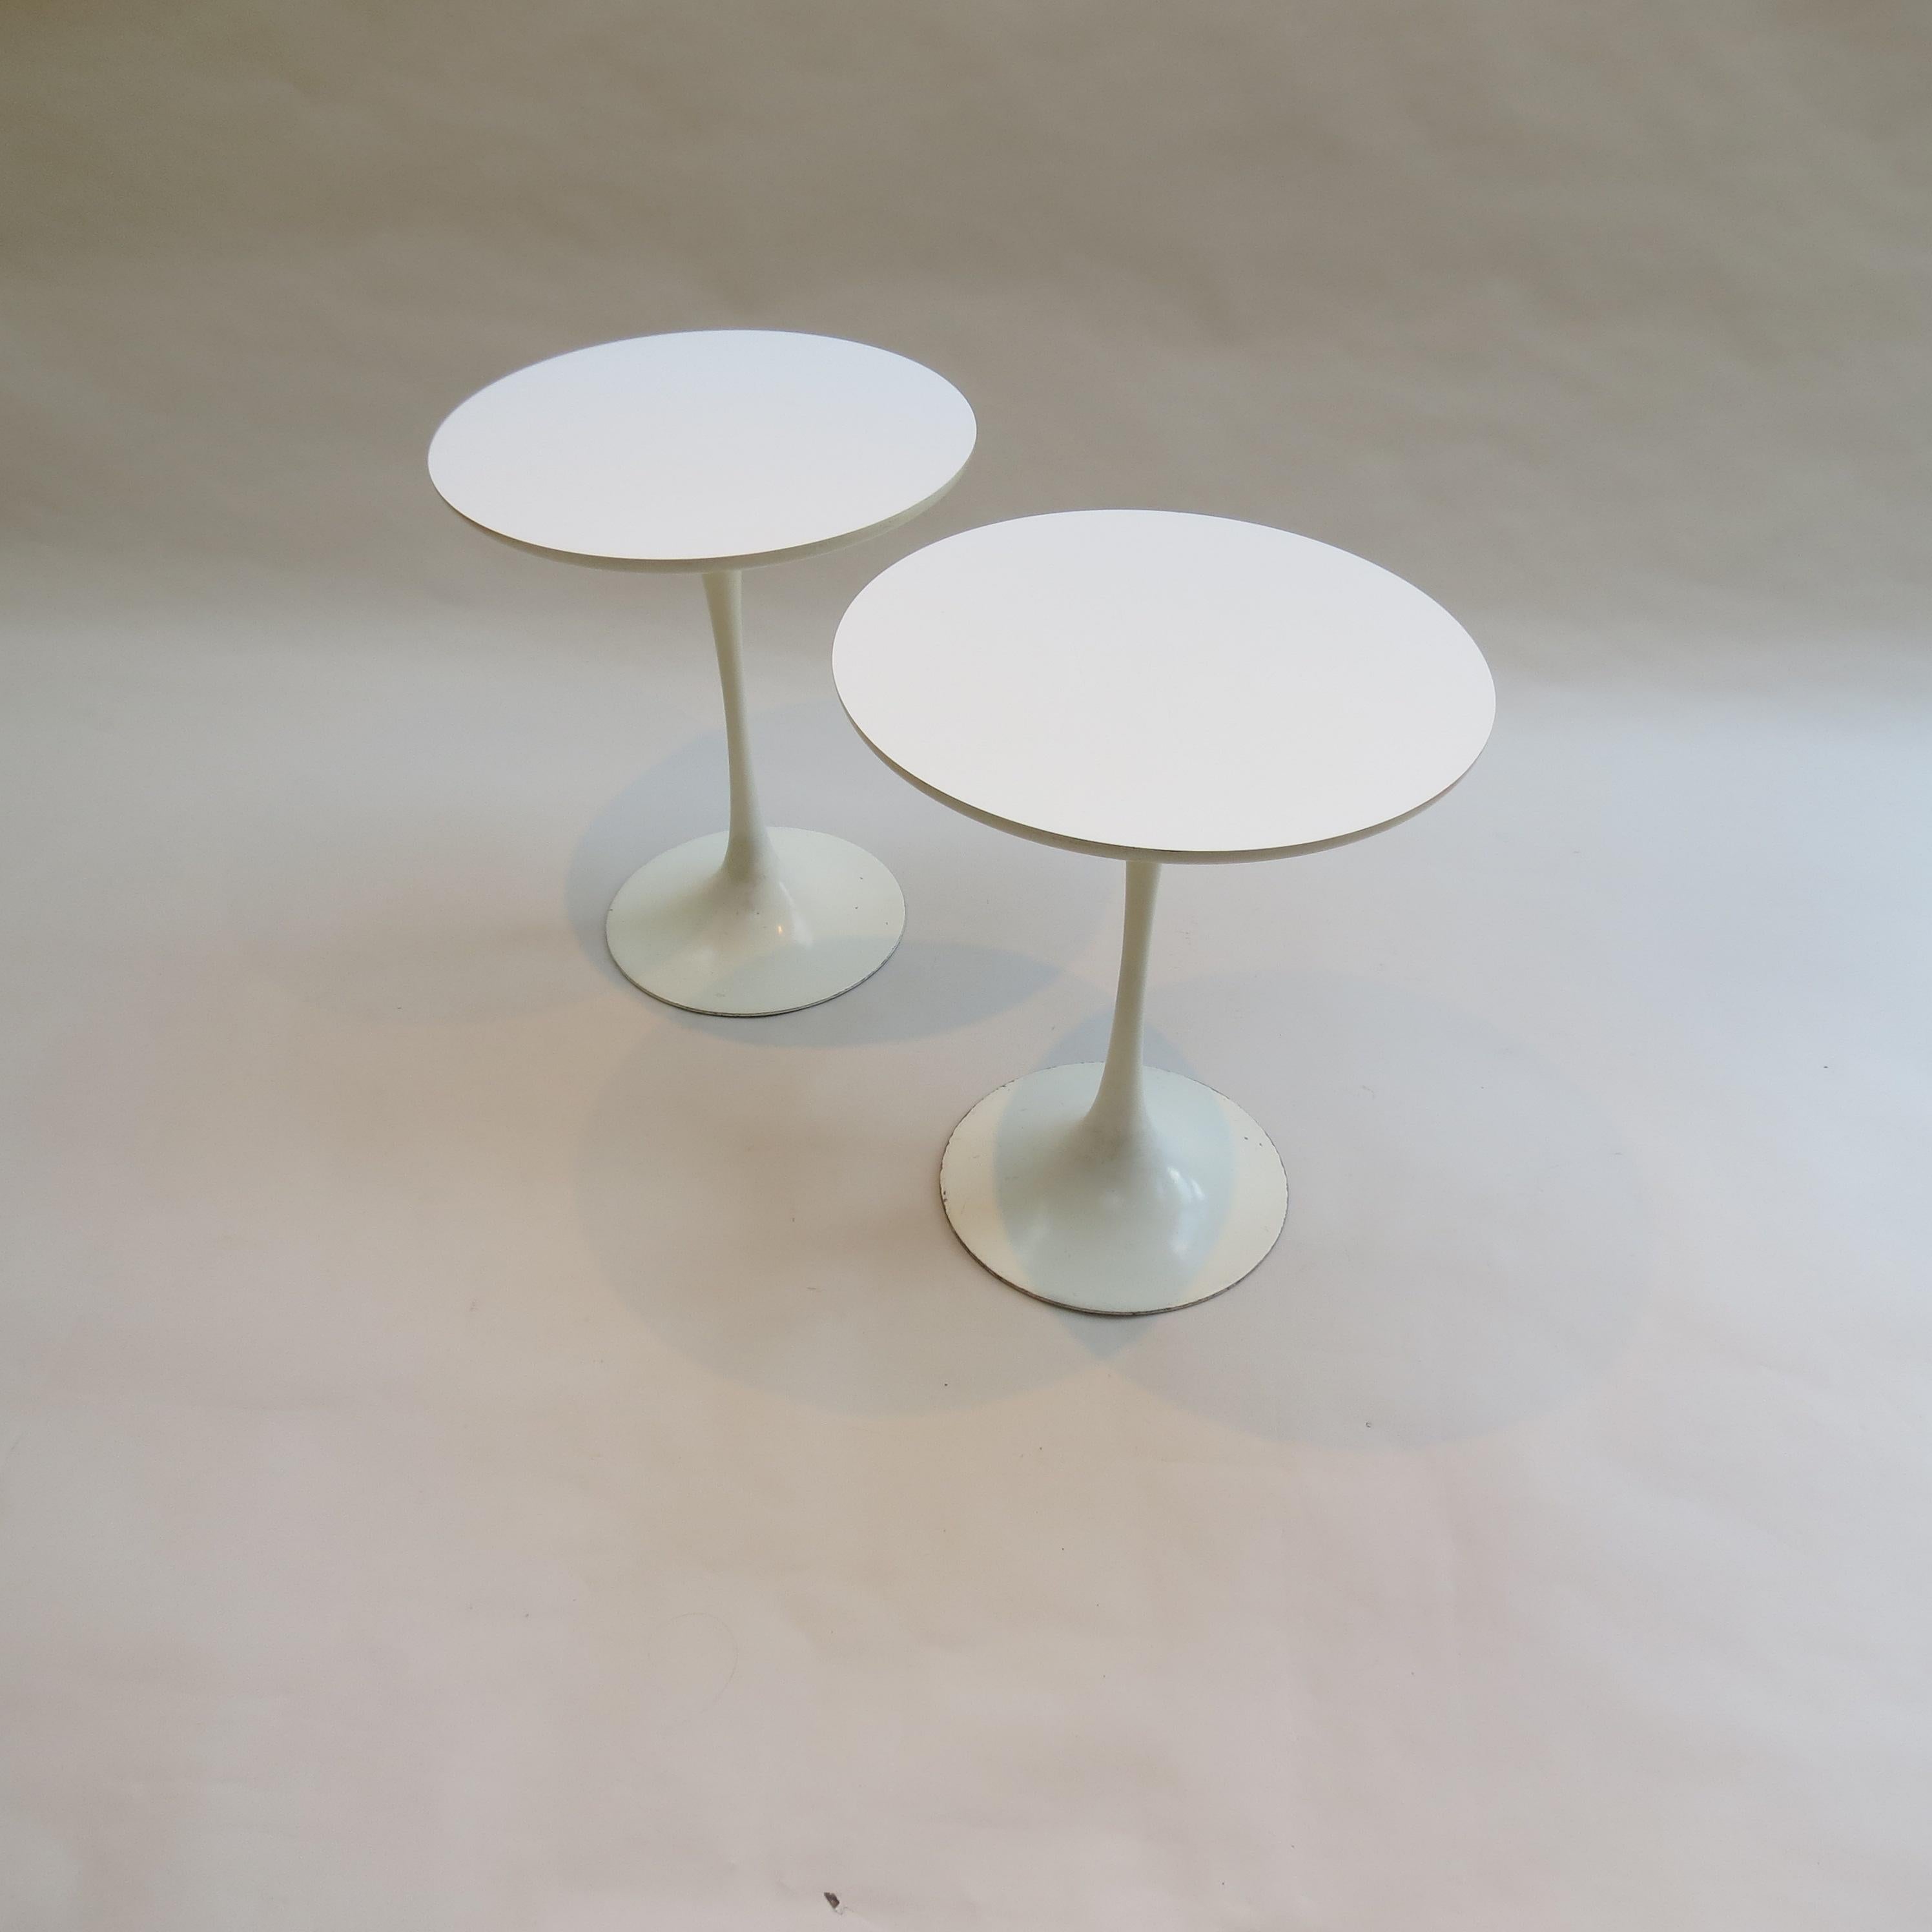 Pair of 1960s tulip side tables designed by Maurice Burke for Arkana, bath, UK.

Cast aluminium base and circular laminate top.

Some wear and small chips to the base. Tops in good over all condition with minor wear.

Stamped to underside of